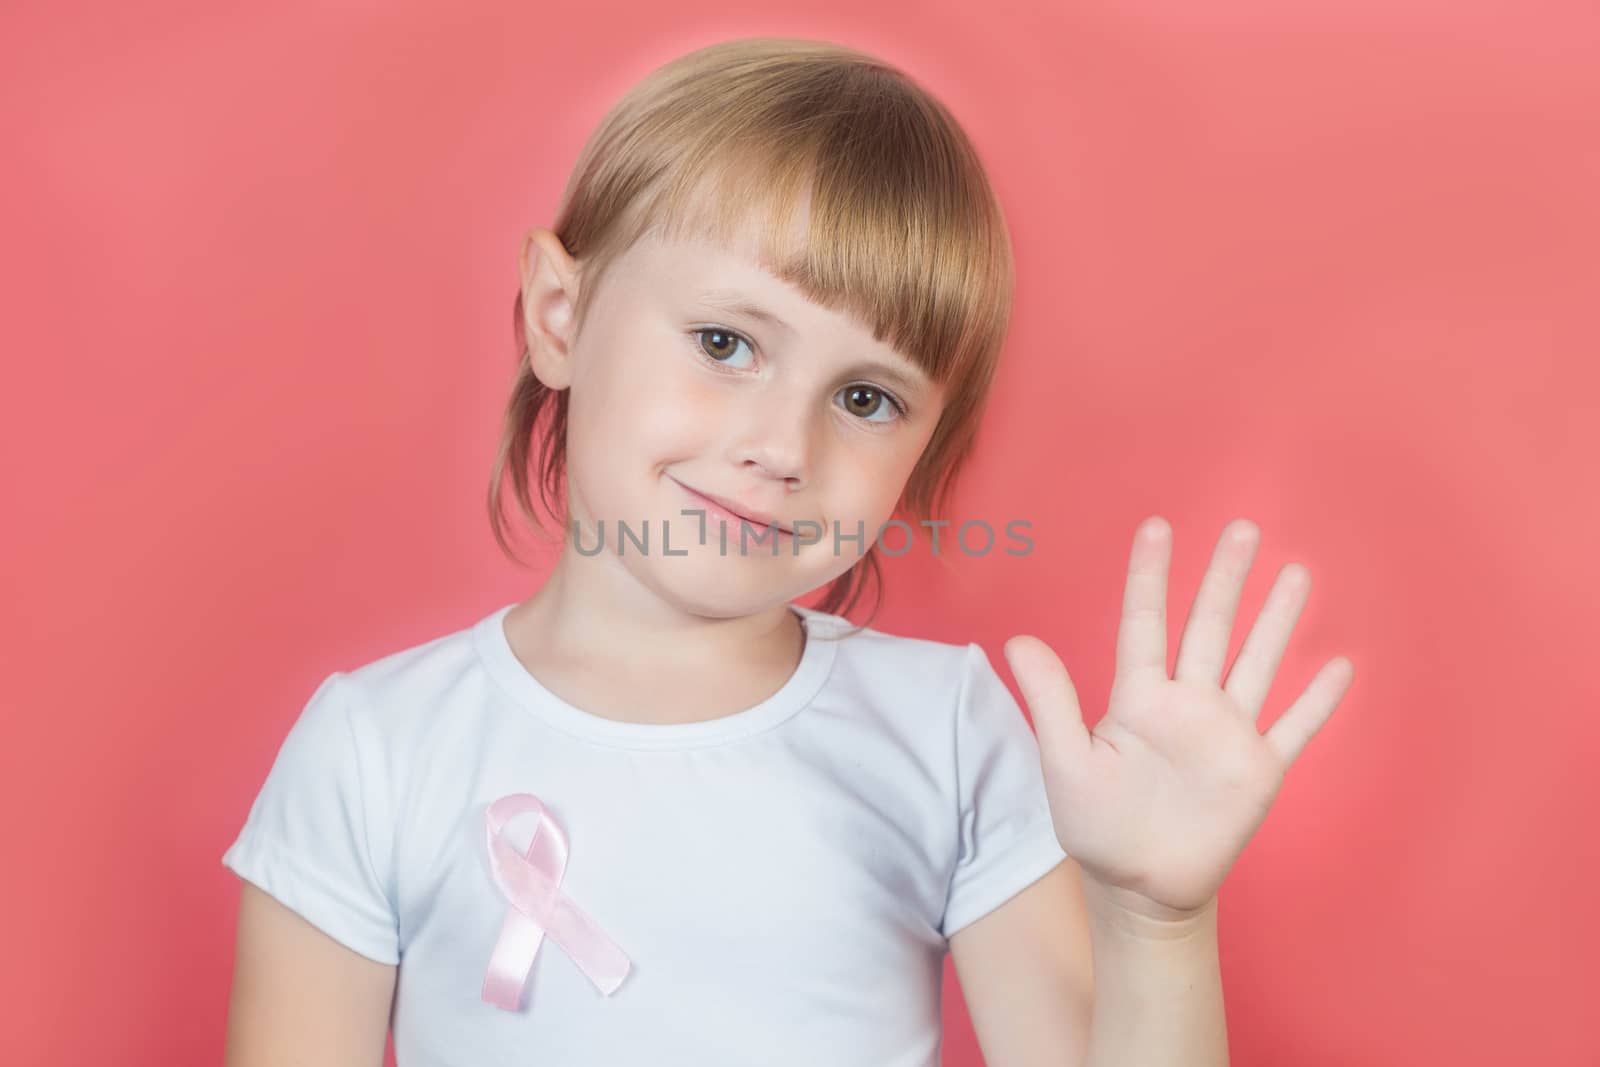 Little girl showing stop sign with hand wearing white t-shirt and pink breast cancer awareness ribbon